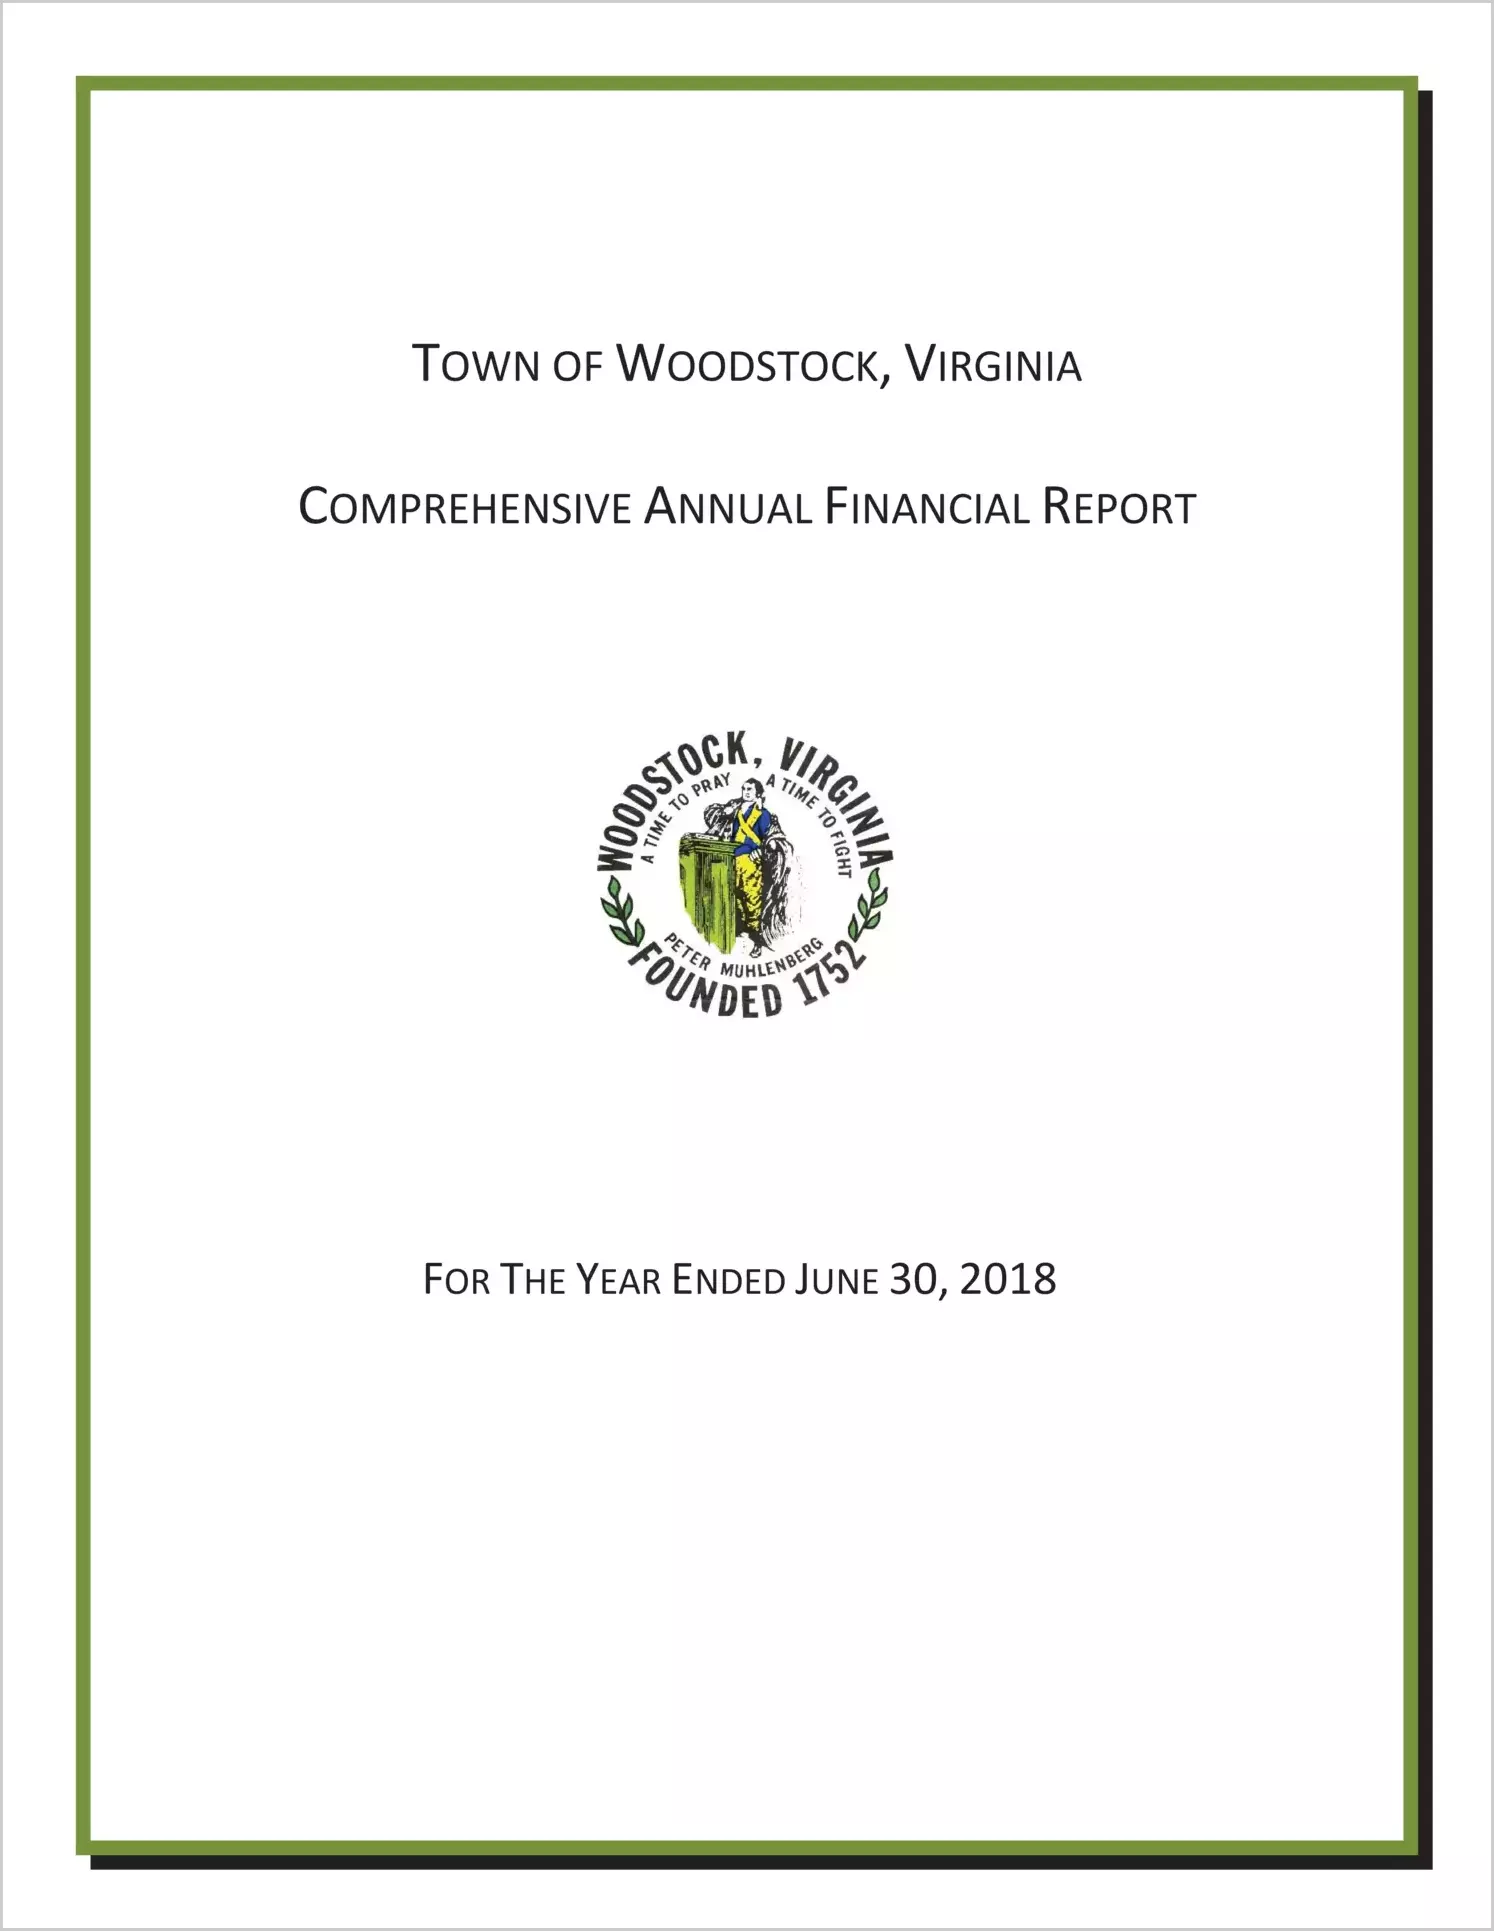 2018 Annual Financial Report for Town of Woodstock